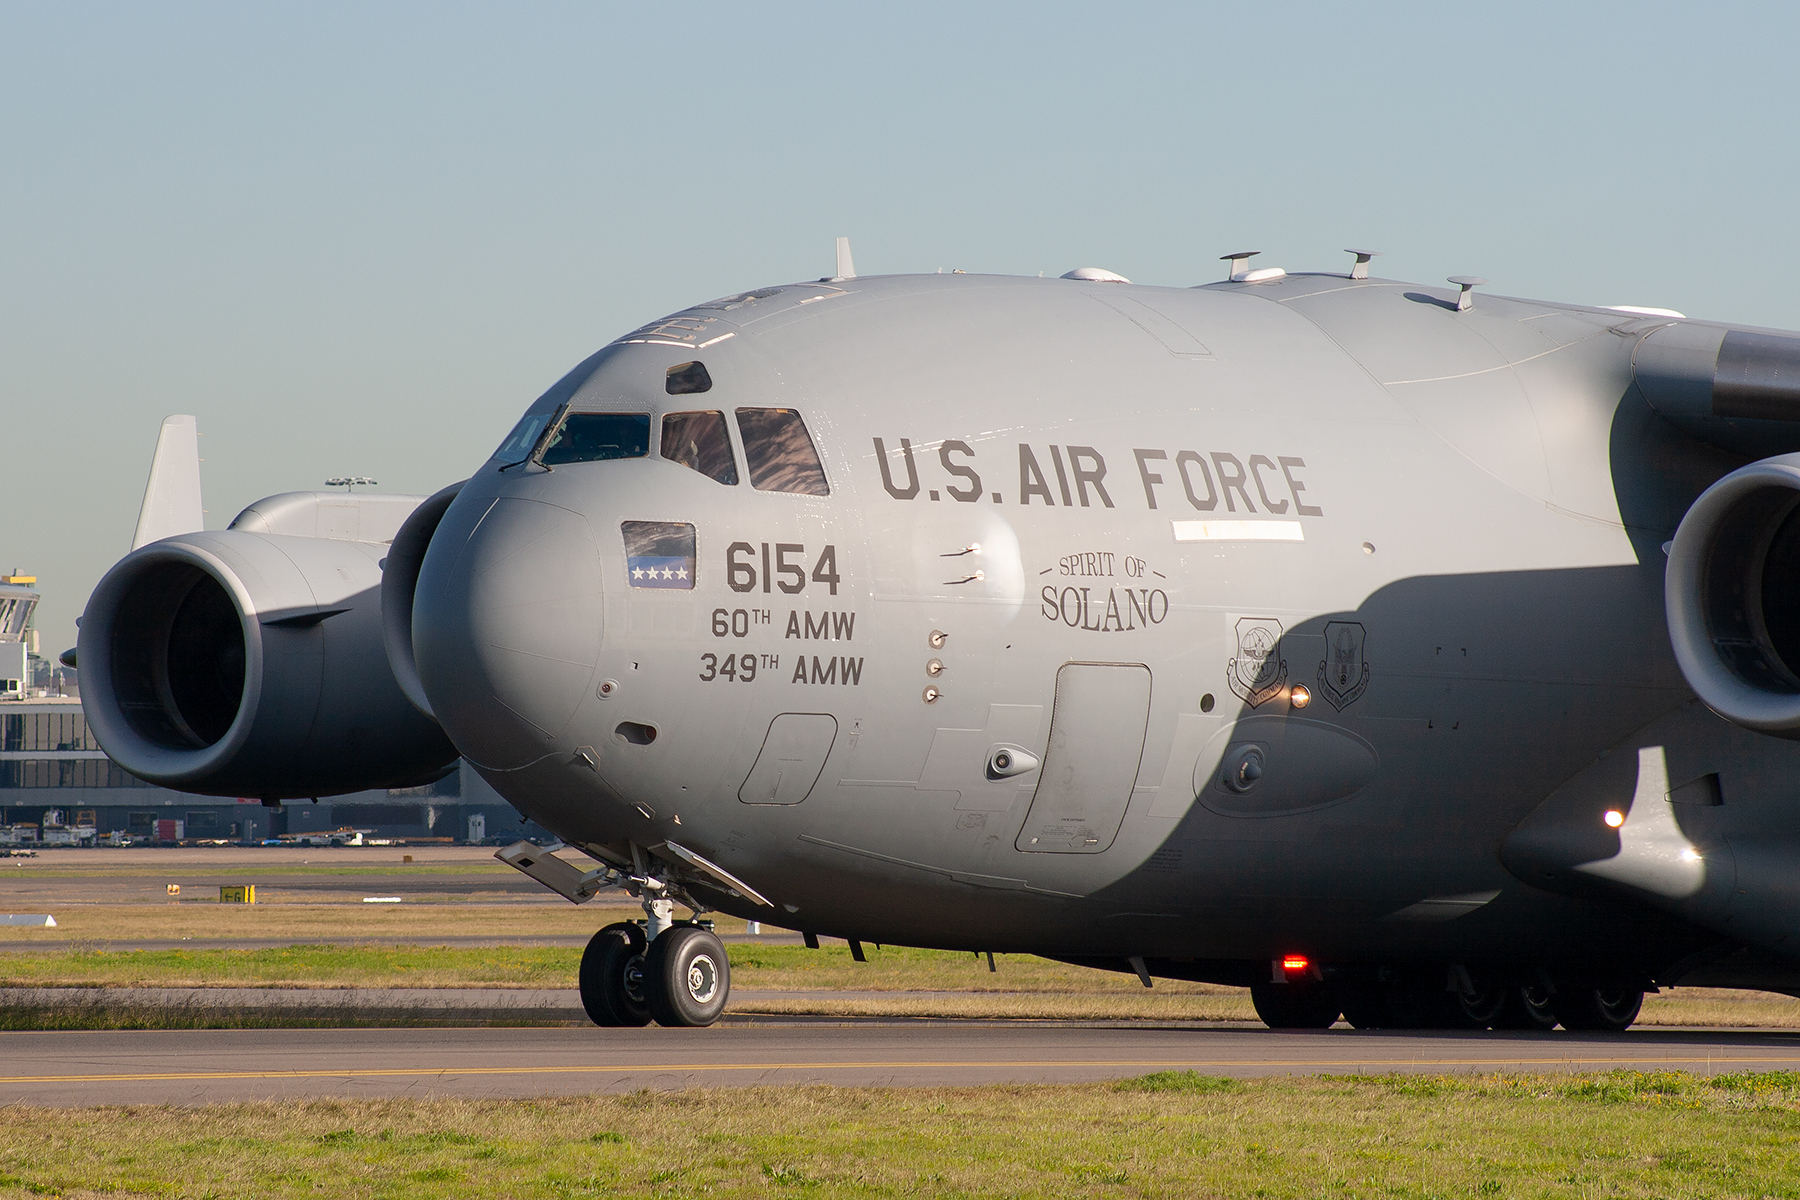 USAF Boeing C-17A 06-6154 at Kingsford Smith